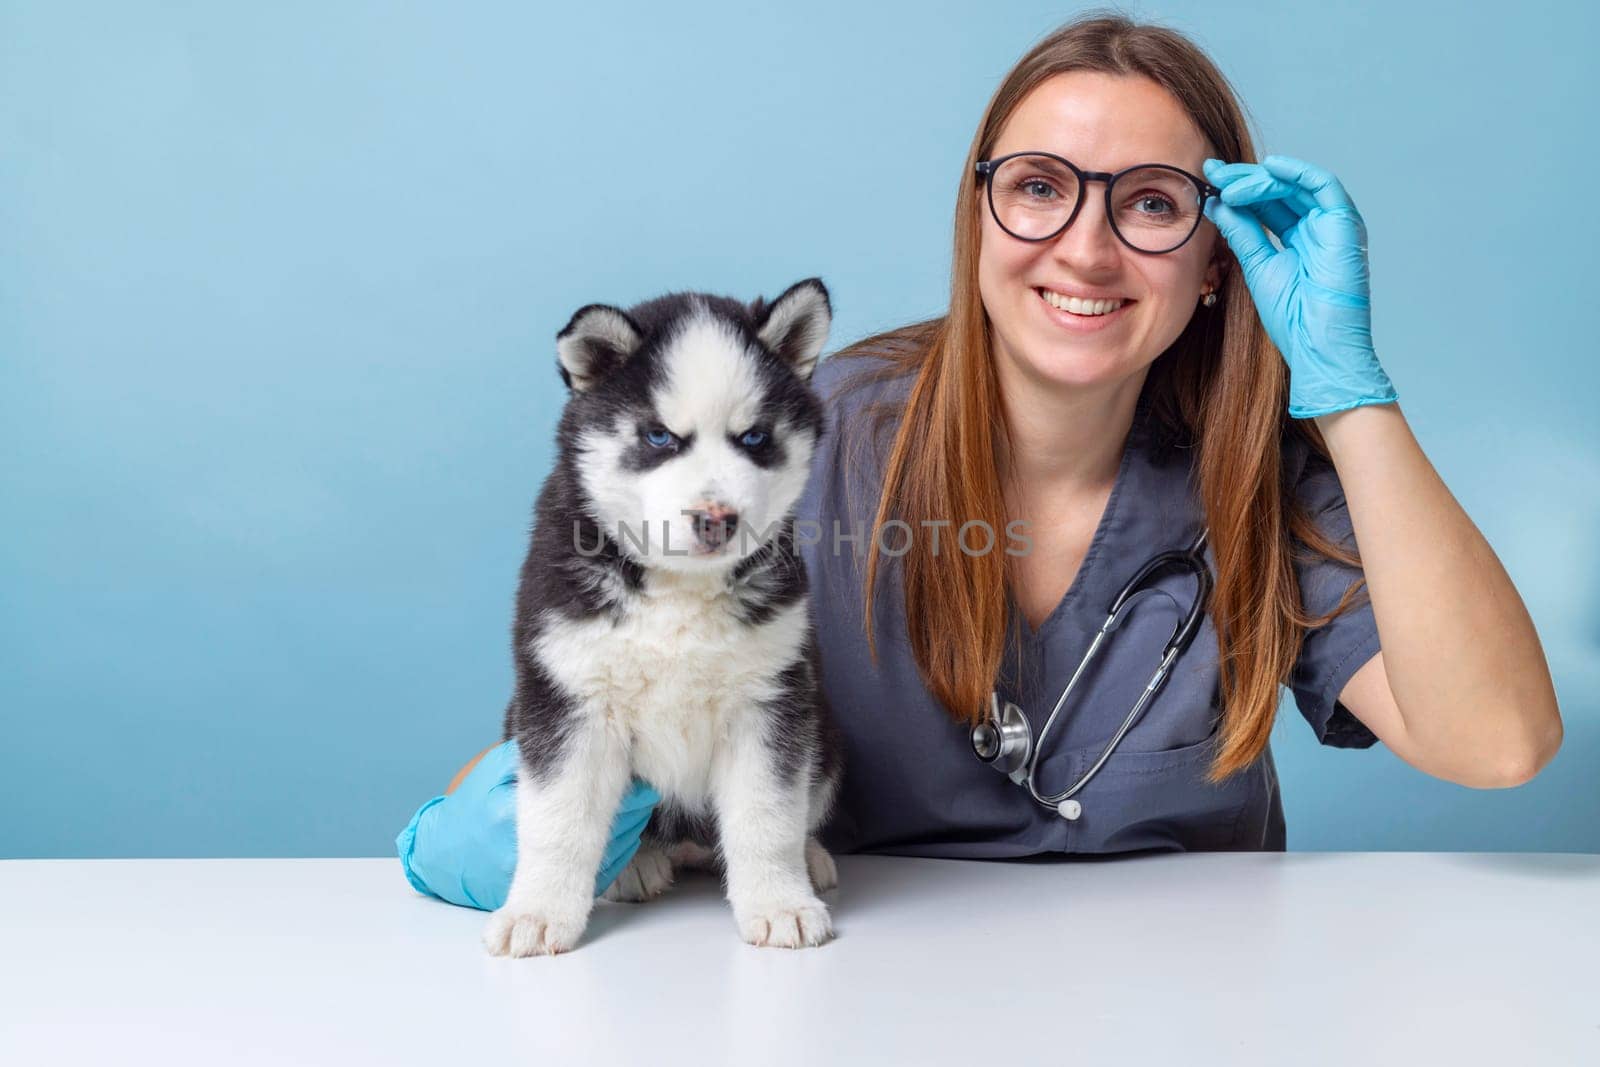 Veterinarian with puppy. Studio pet portrait on blue background. Pet care and health concept.